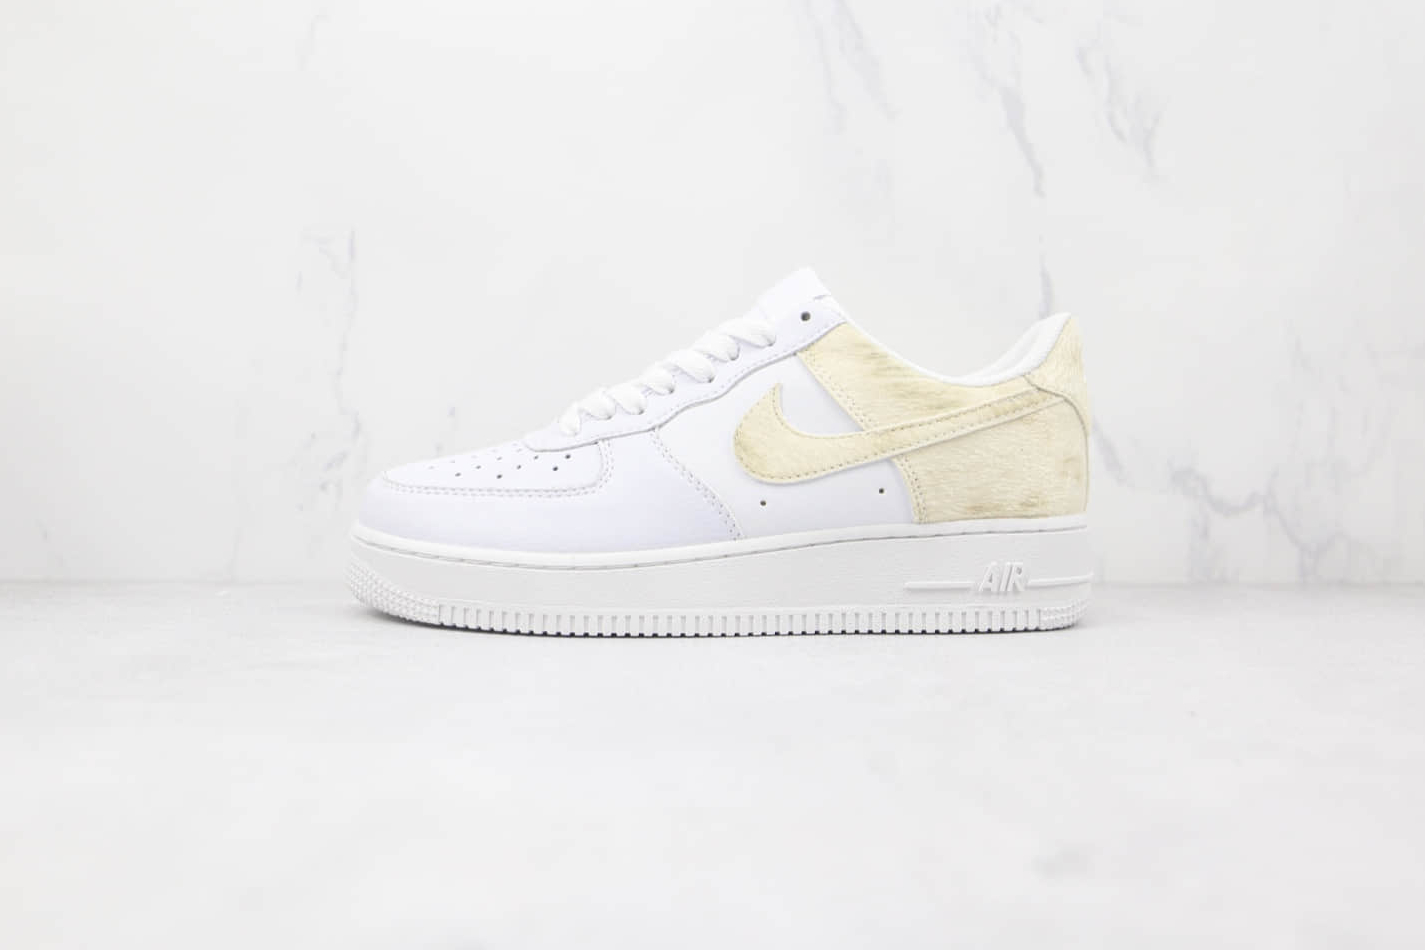 Nike Air Force 1 Low 'Pony Hair' DM9088-001 - Premium Sneakers for Unmatched Style